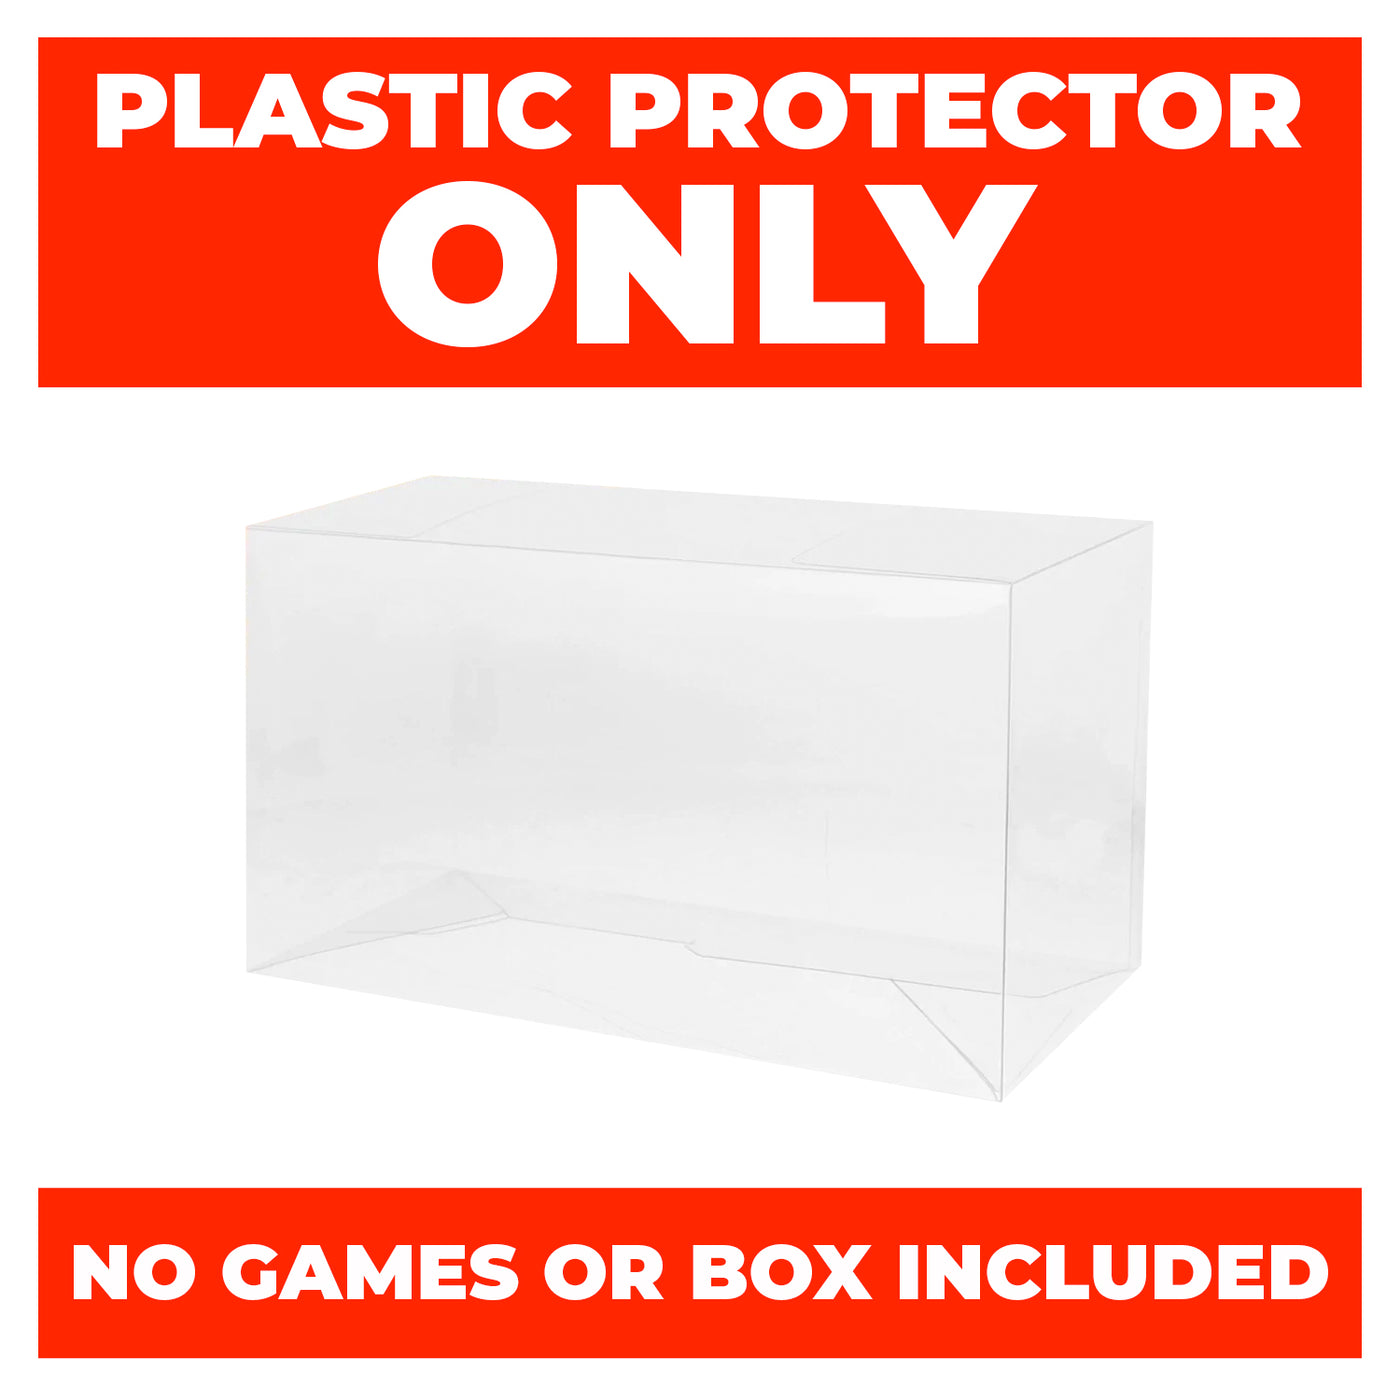 Plastic Protector for Wii ZELDA SKYWARD SWORD SE Video Game Box 0.50mm thick, UV & Scratch Resistant on The Pop Protector Guide by Display Geek